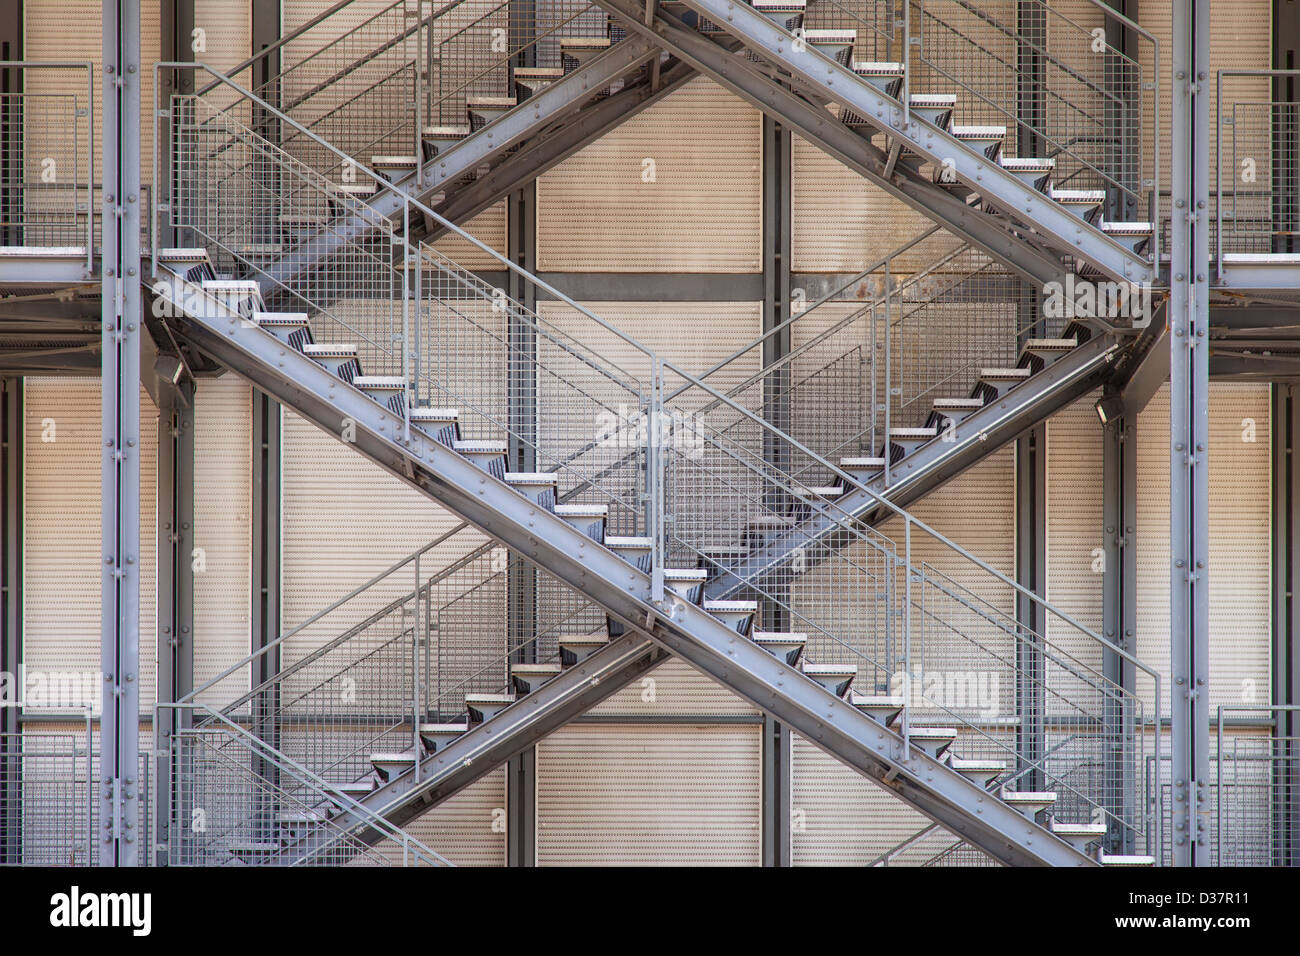 Scissored stairs on the exterior of the Georges Pompidou Centre, Paris France Stock Photo